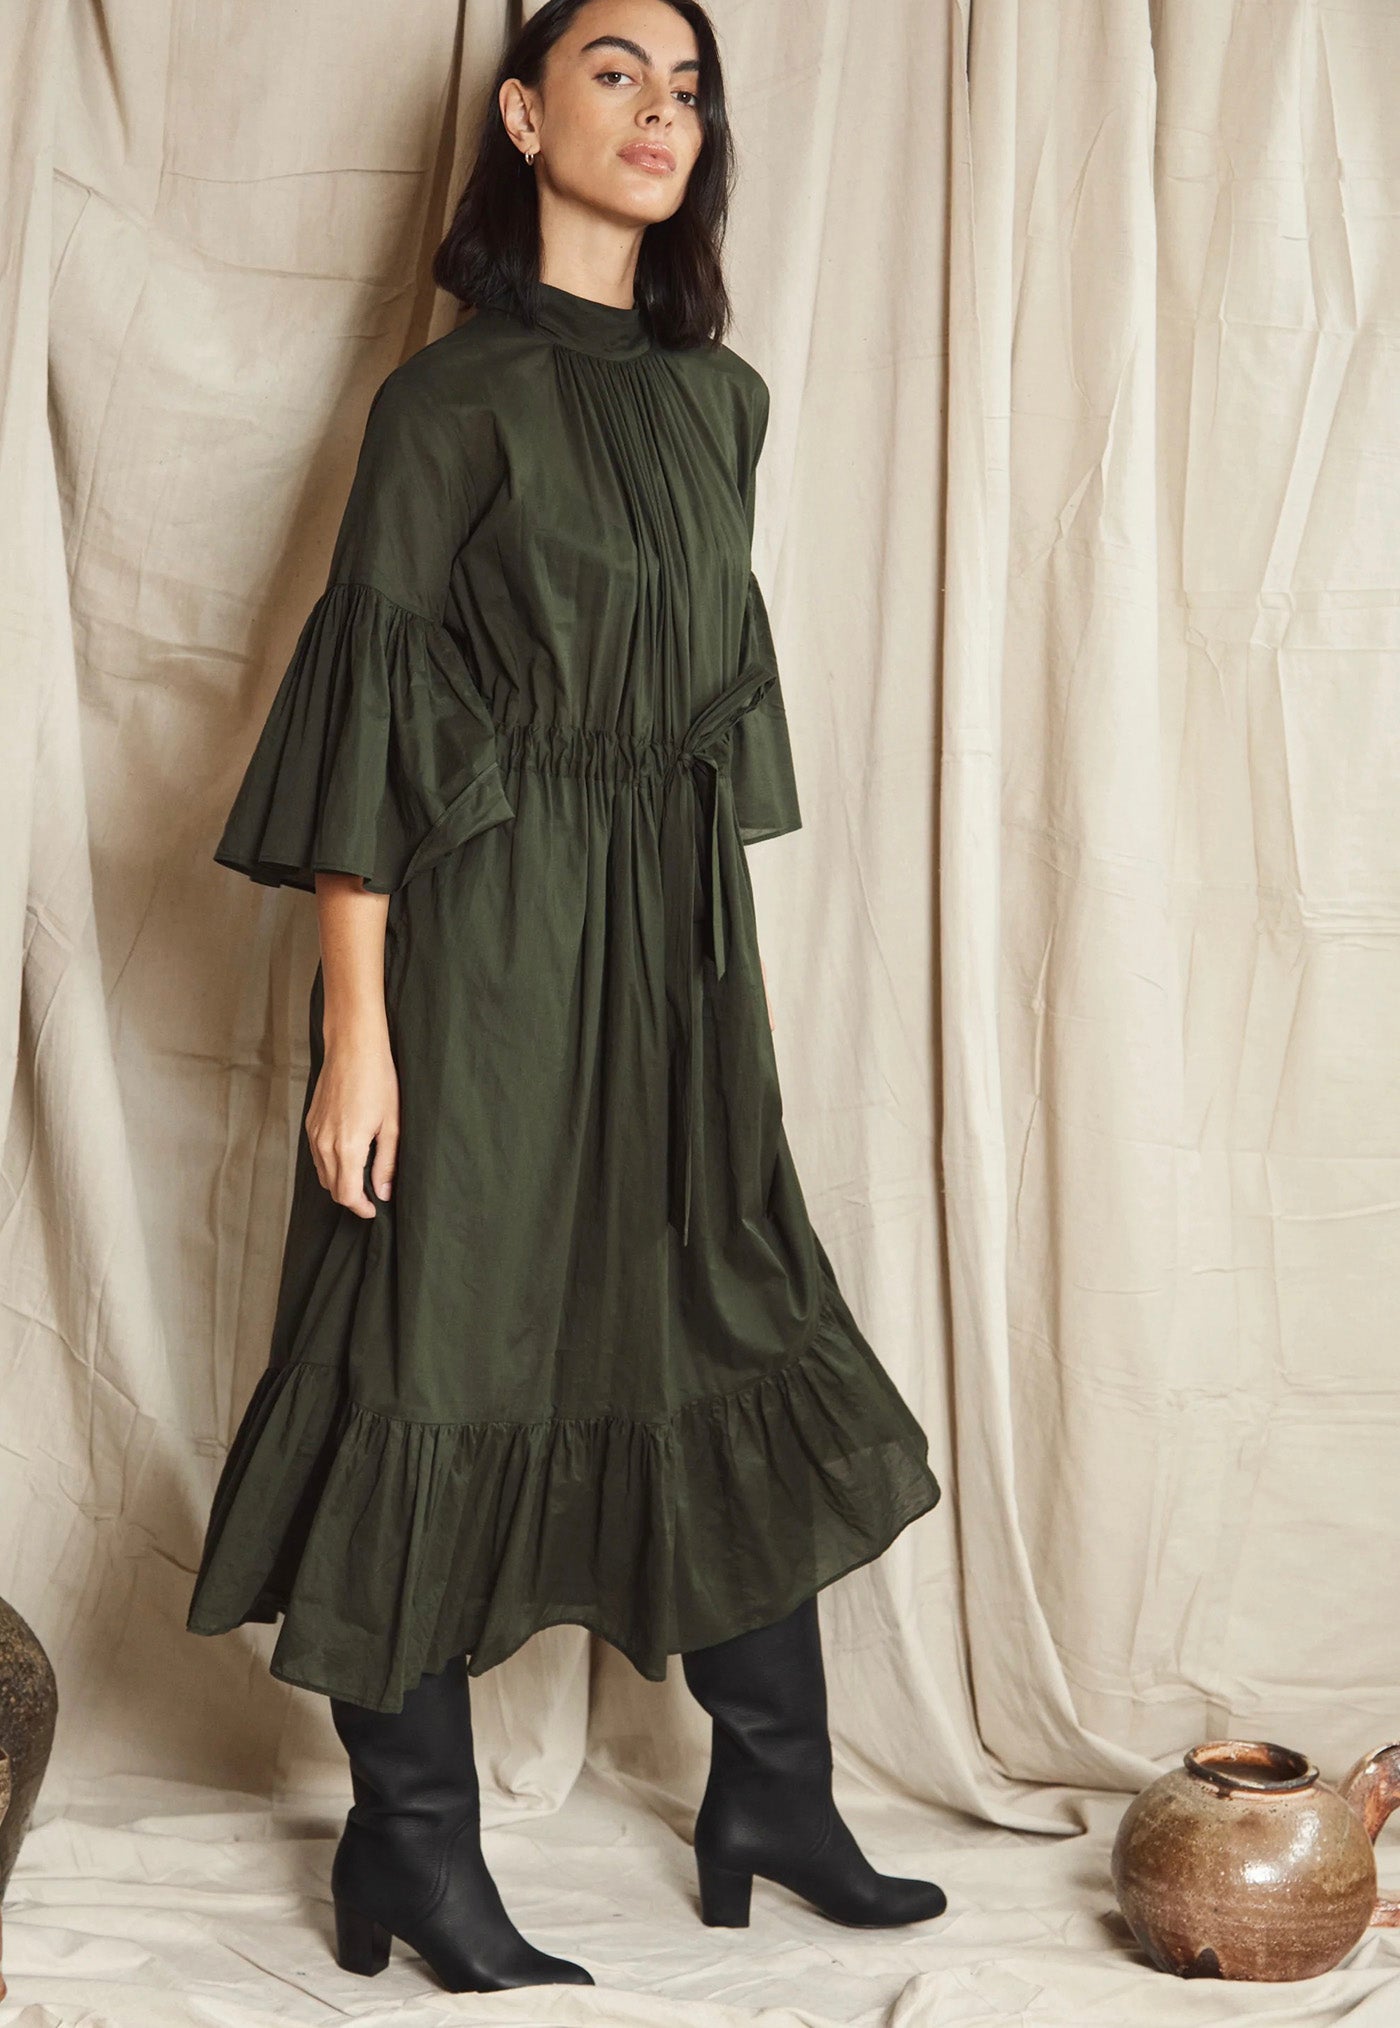 O'Keeffe Dress - Cotton Voile Jungle sold by Angel Divine